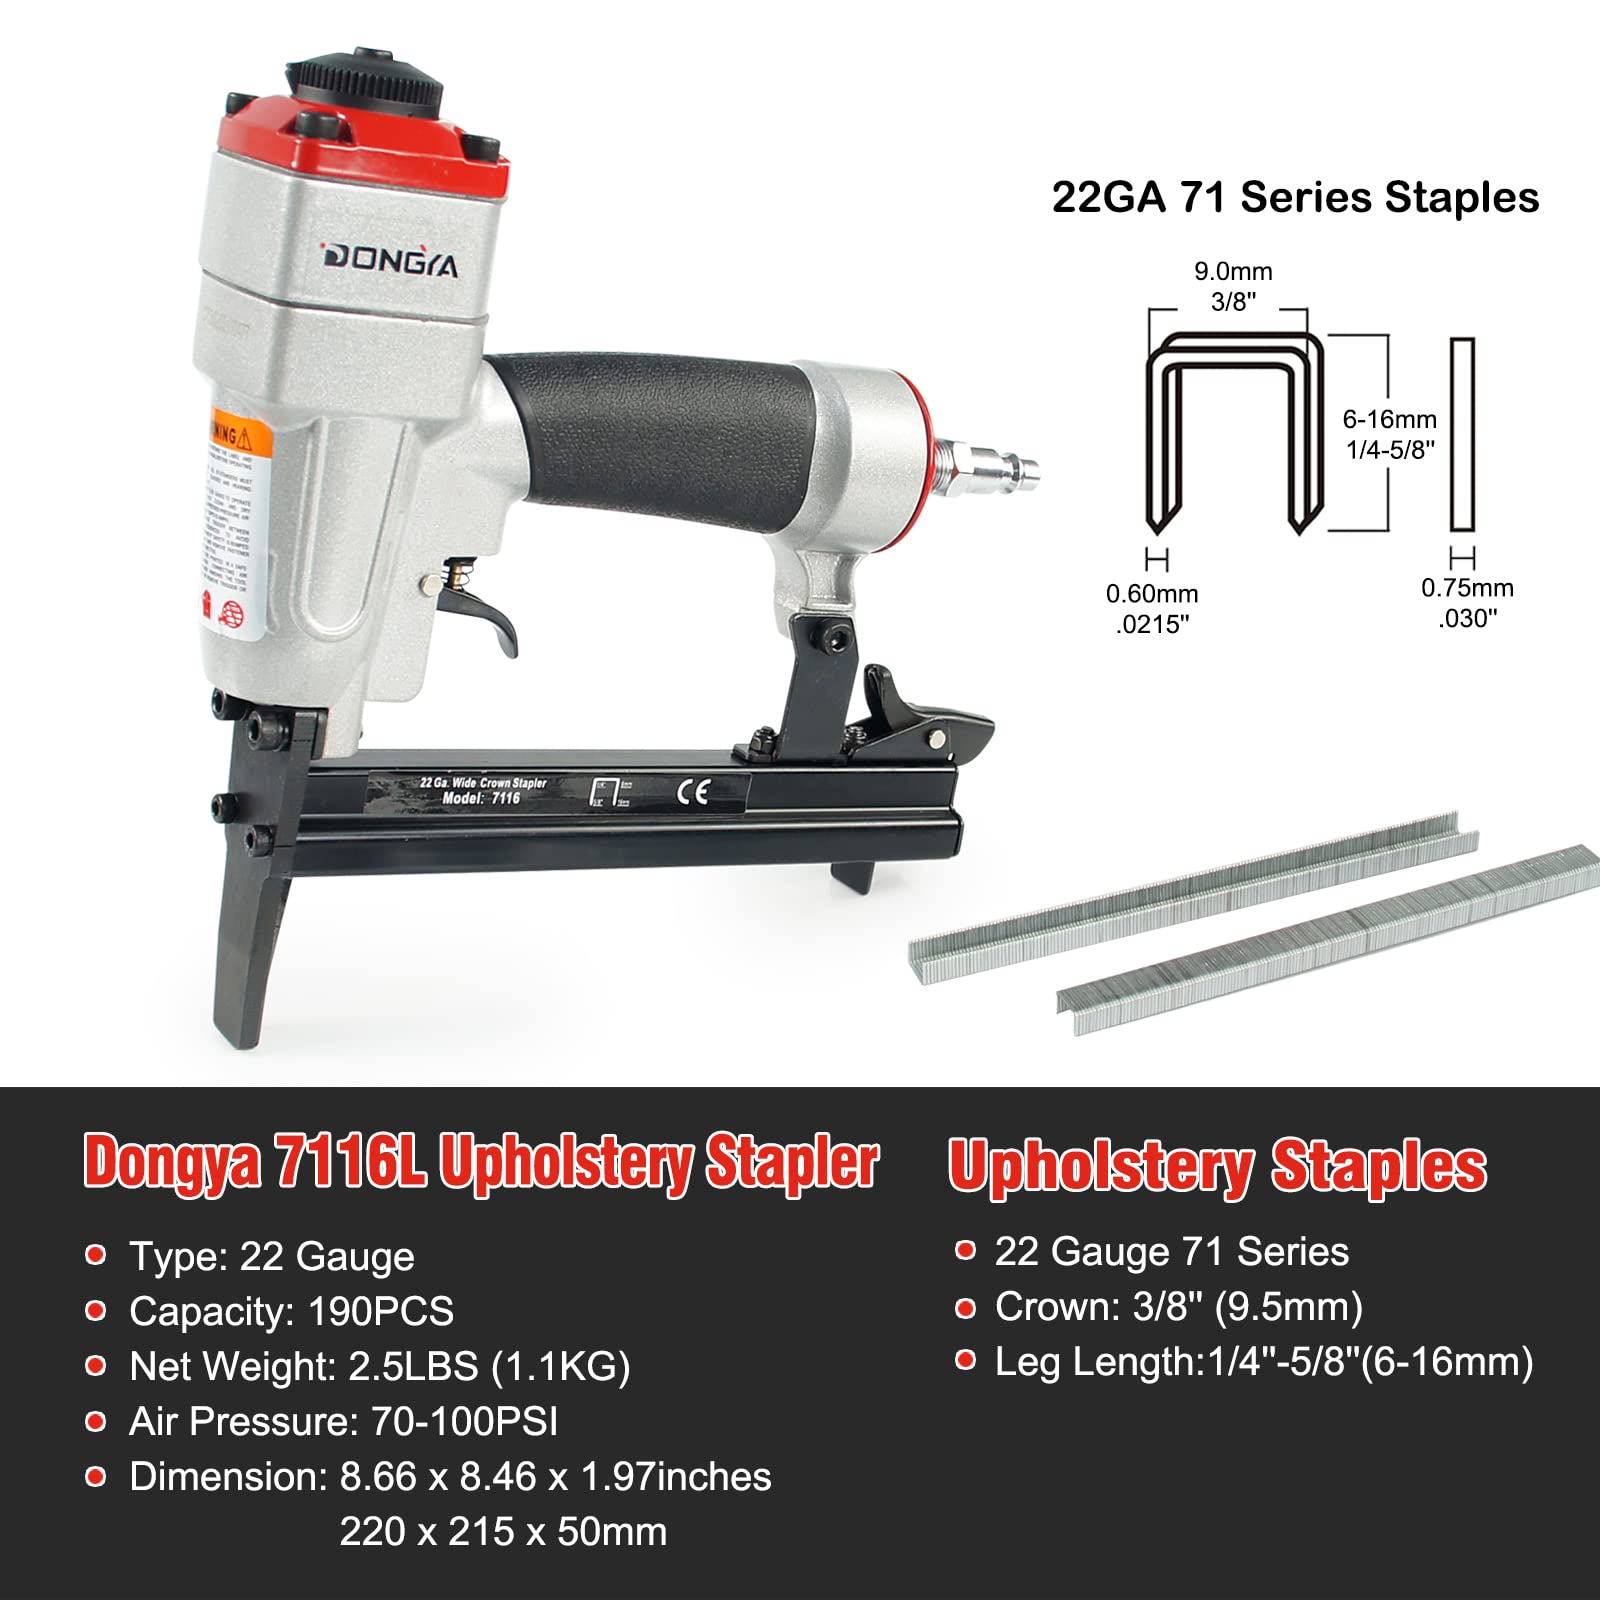 Dongya 7116L Pneumatic Upholstery Stapler with 10,000 PCS Staples, 22 Gauge 1/4'' to 5/8'' Length, 3/8'' Crown Long Nose Staple Gun, Air Power Fine Wire Stapler for Upholstering & Furniture